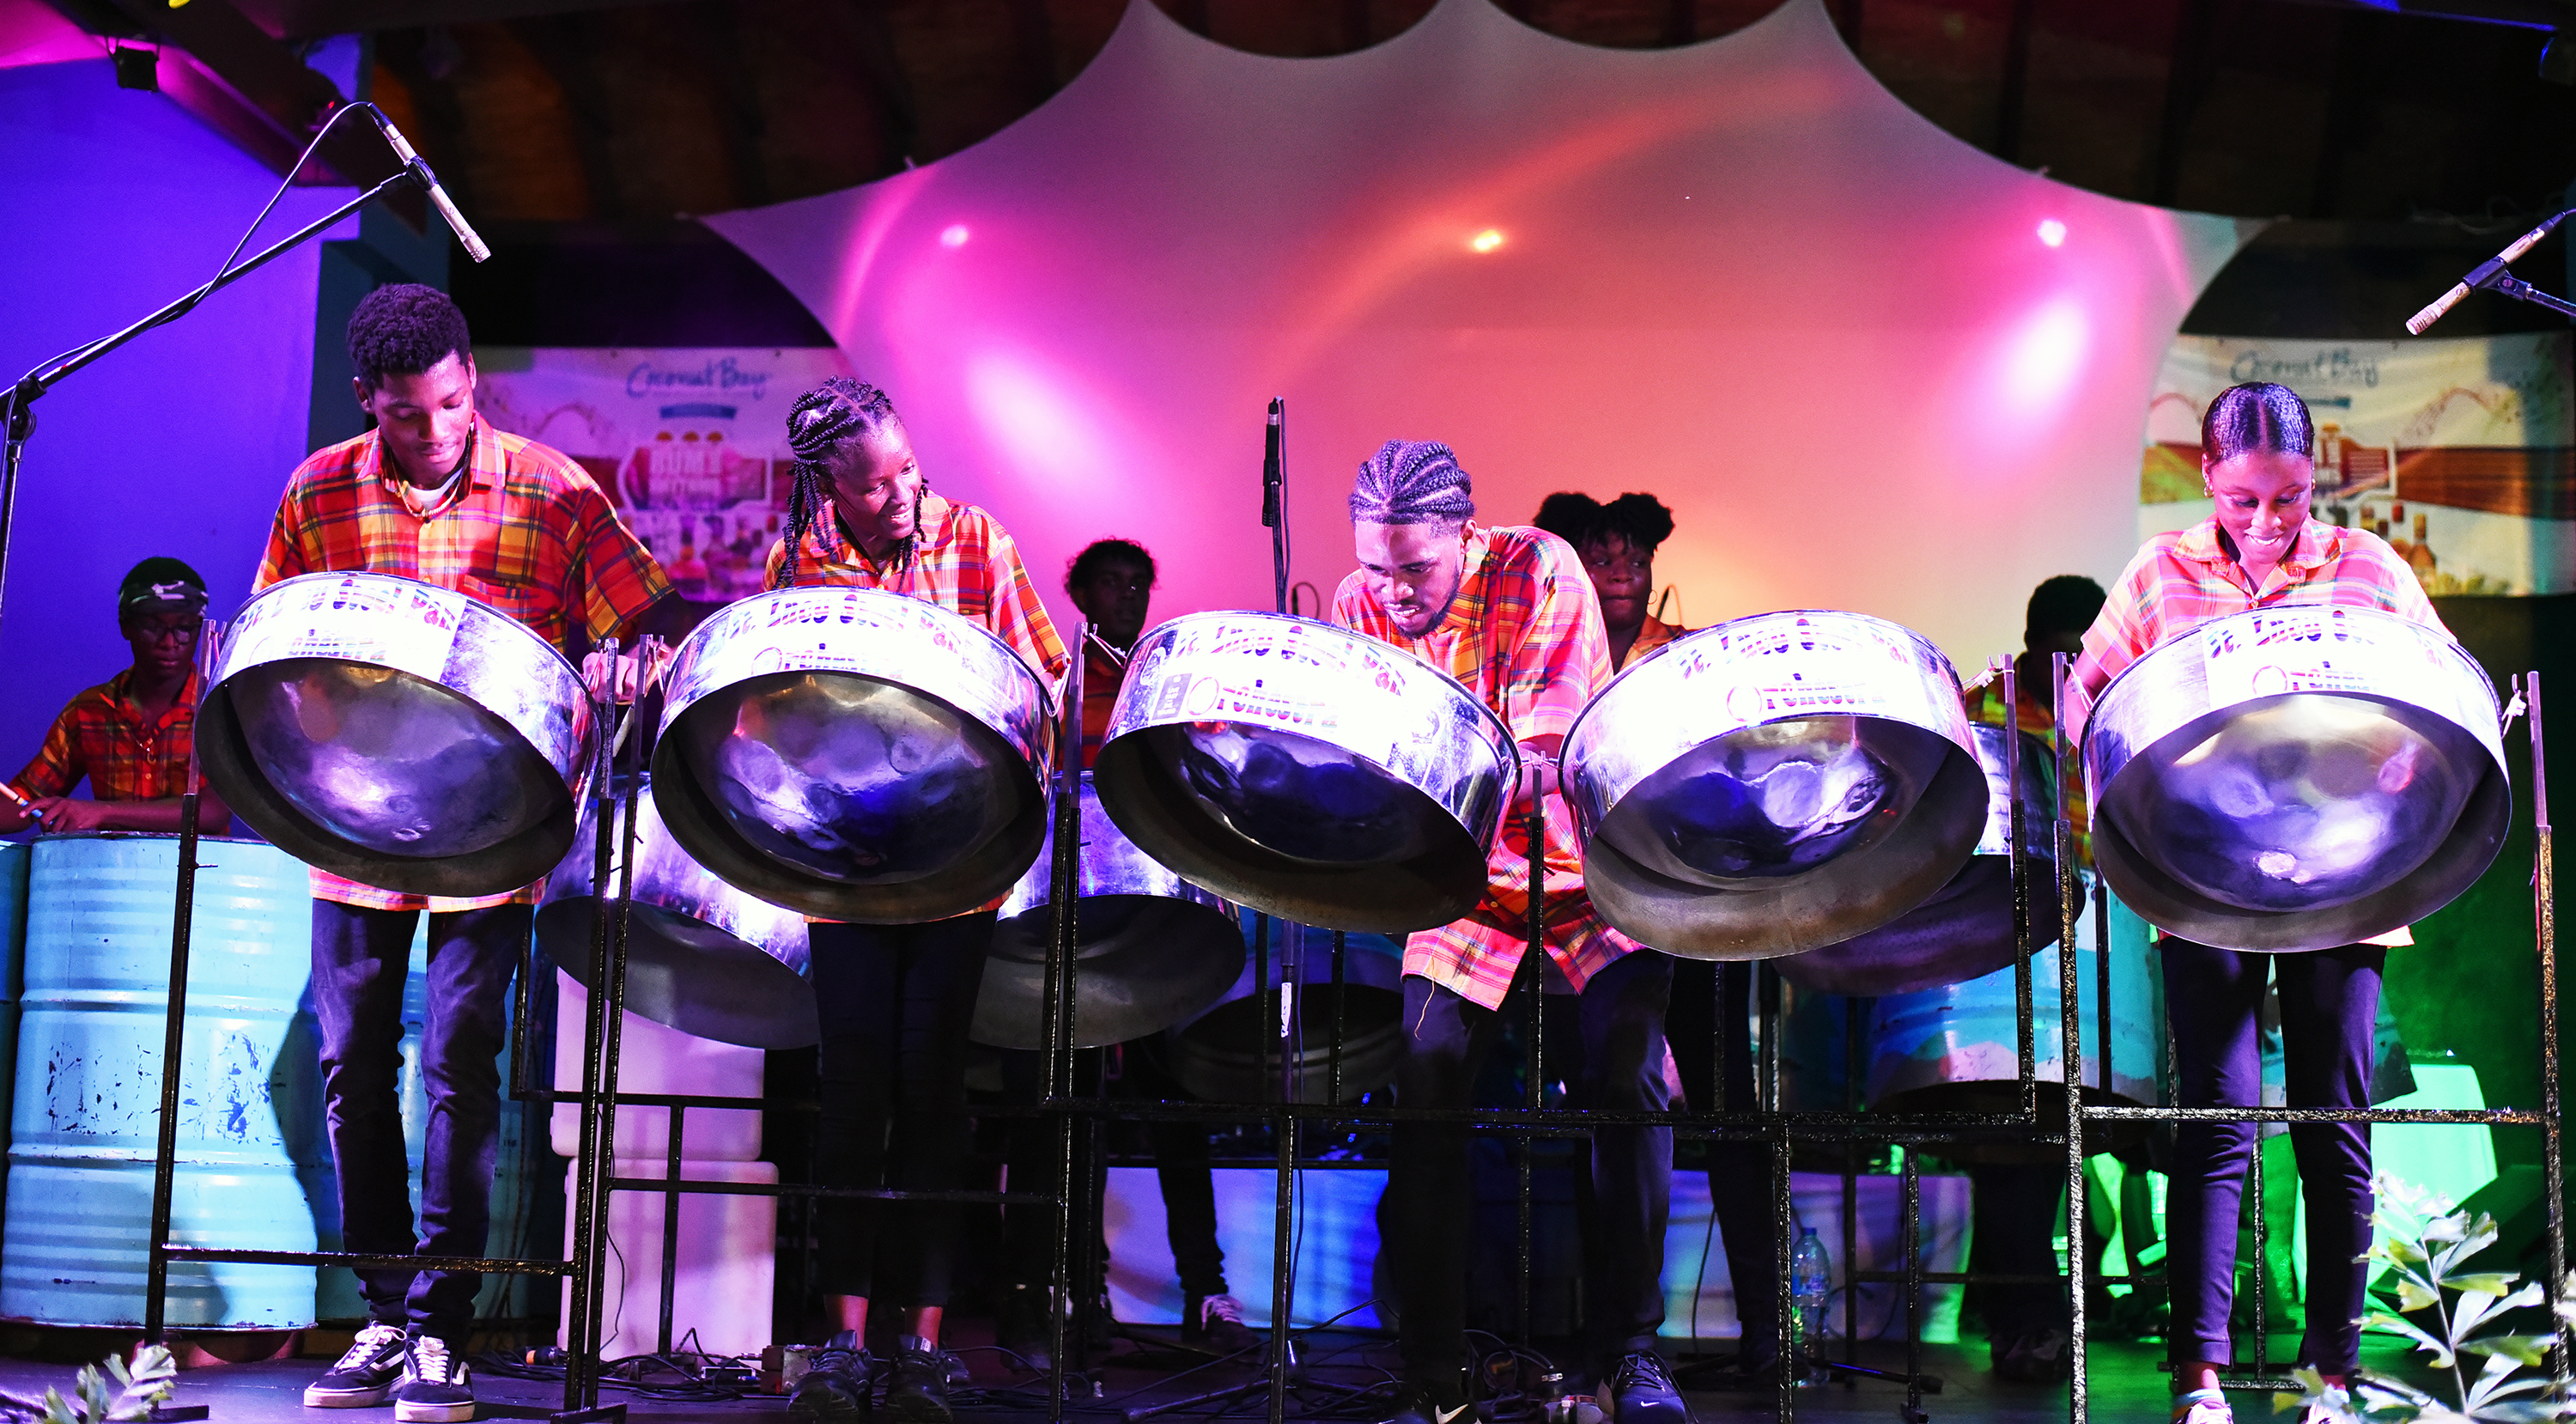 A steel band wows diners at the weekly Caribbean night (Coconut Bay/PA)